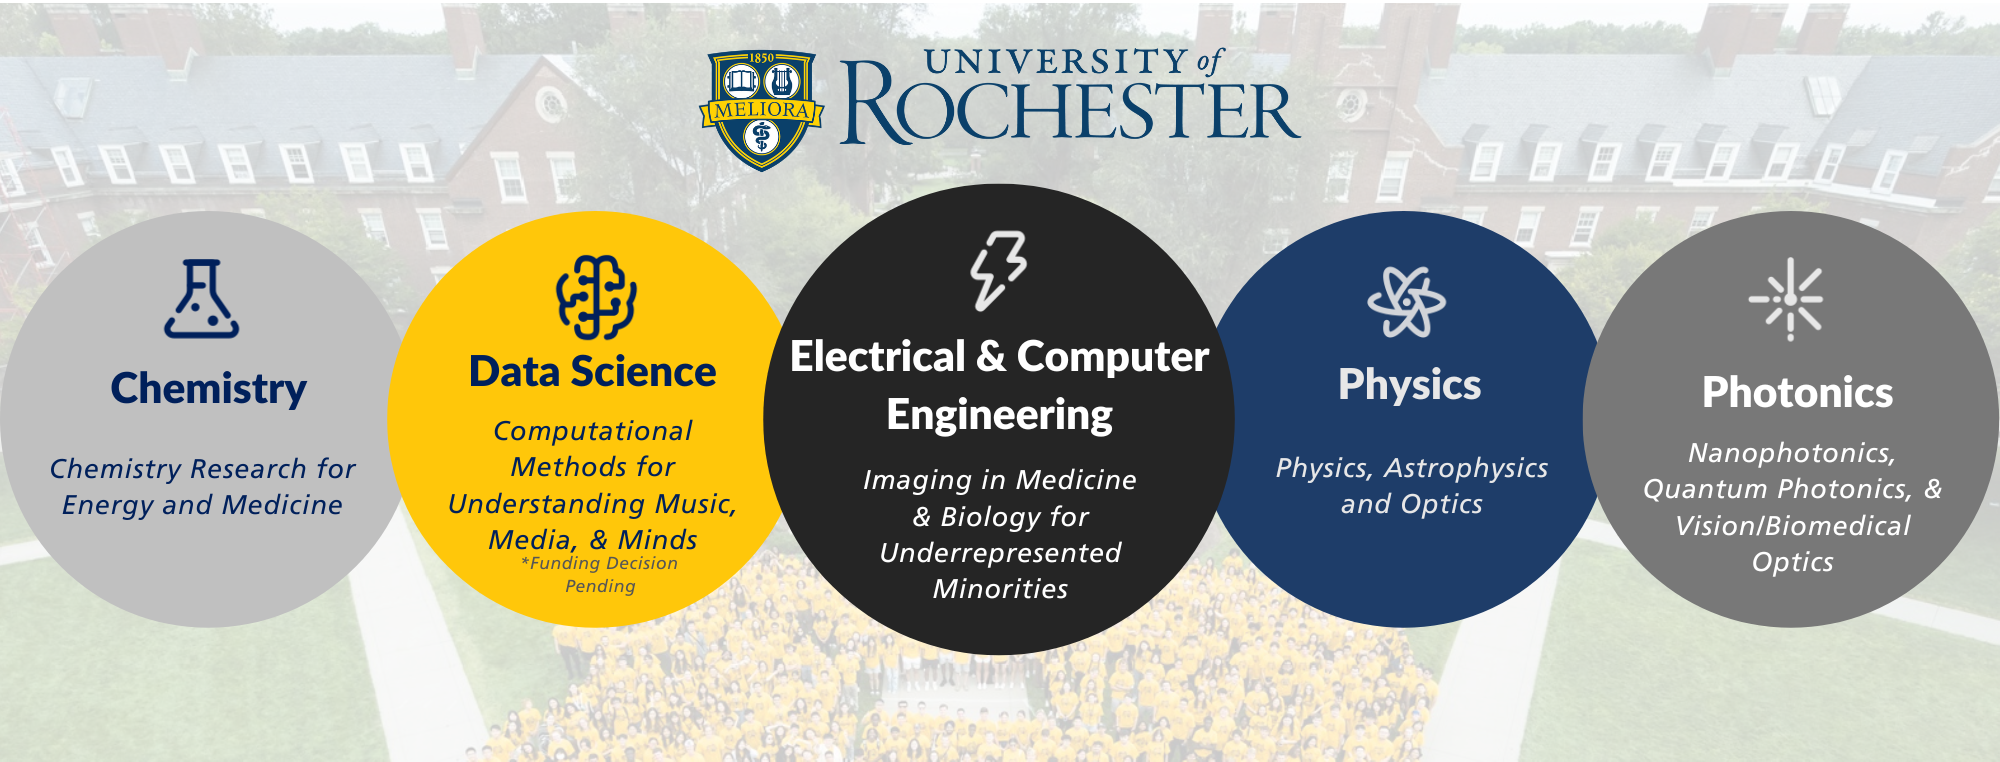 The different 2024 REU offerings at the University of Rochester are depicted on a picture of campus with the University of Rochester logo